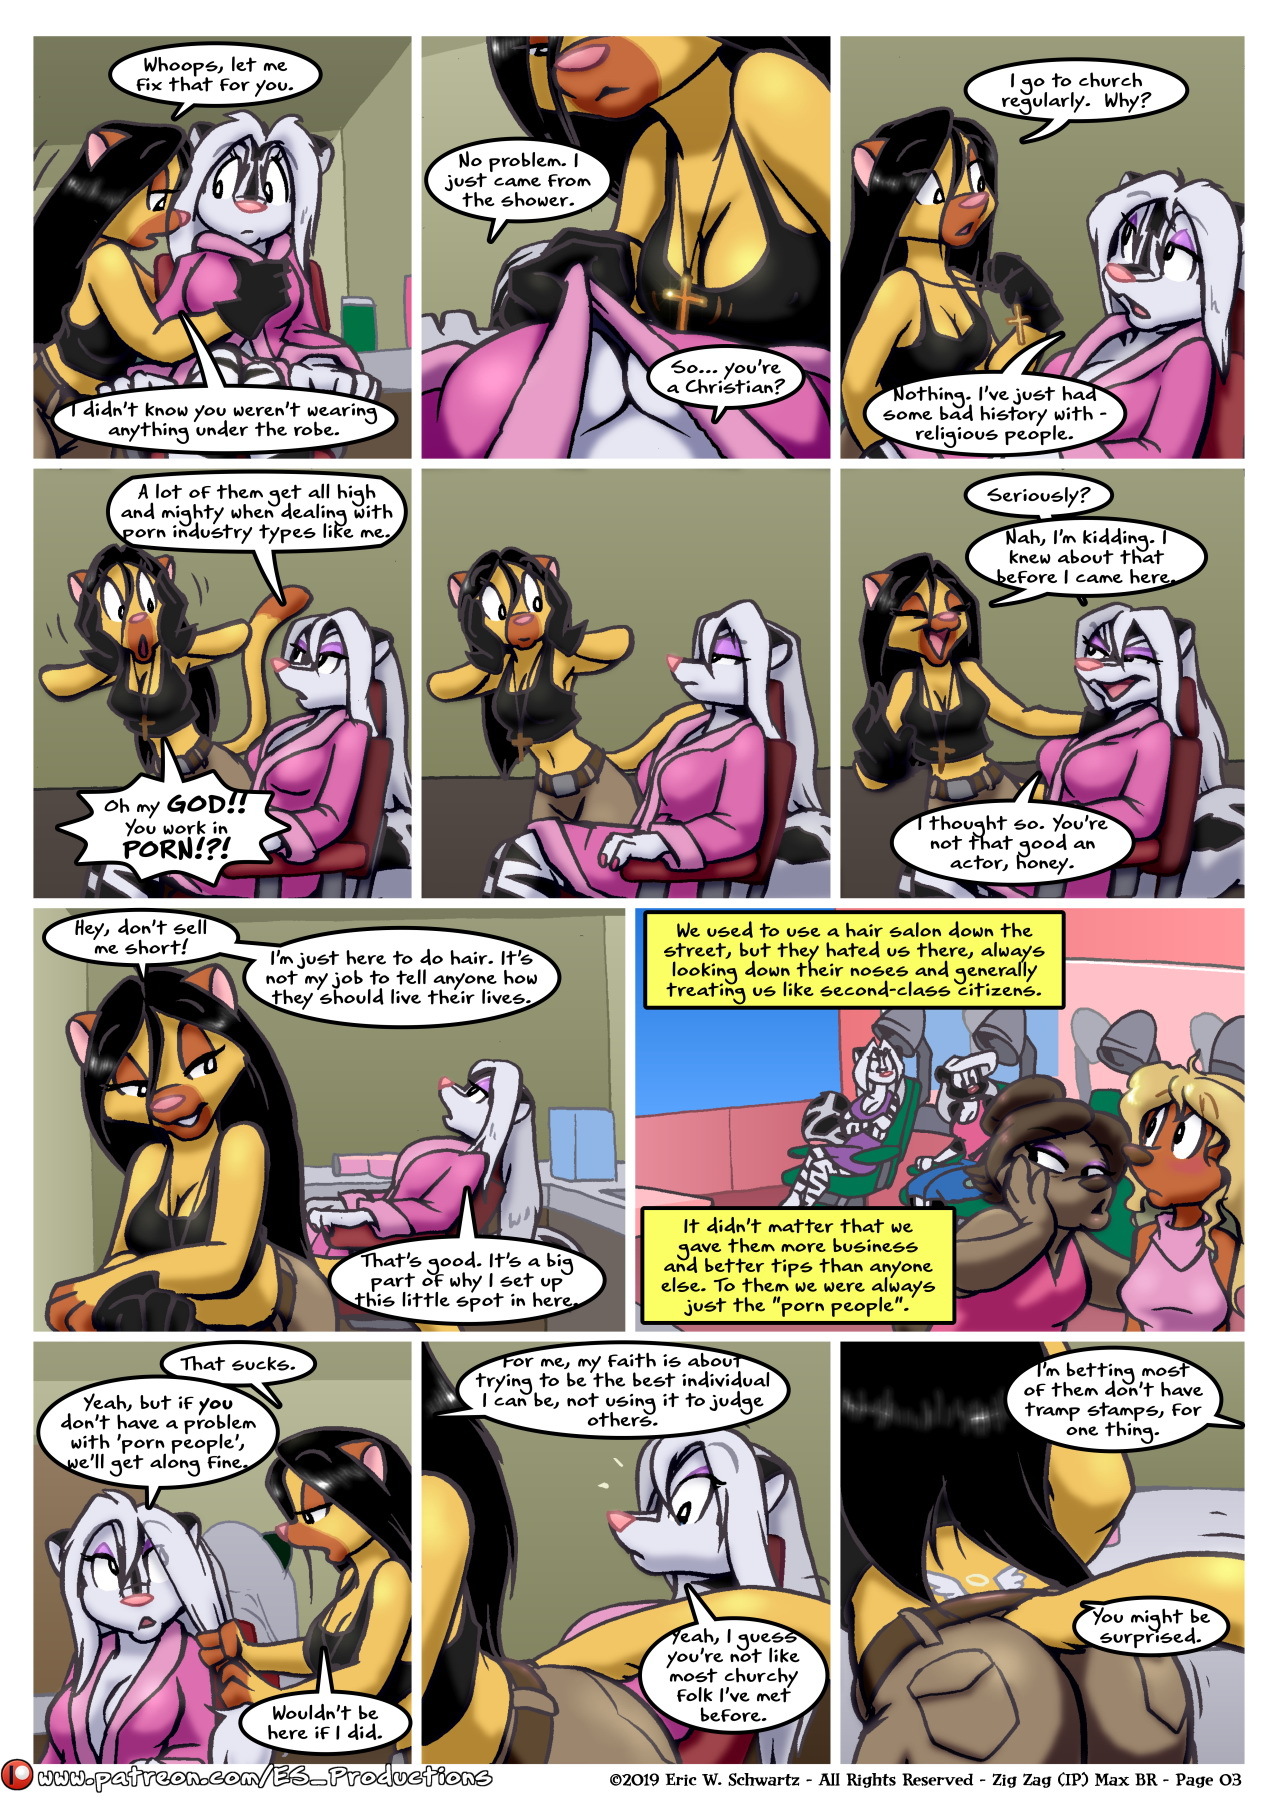 A Hairy Encounter - Page 4